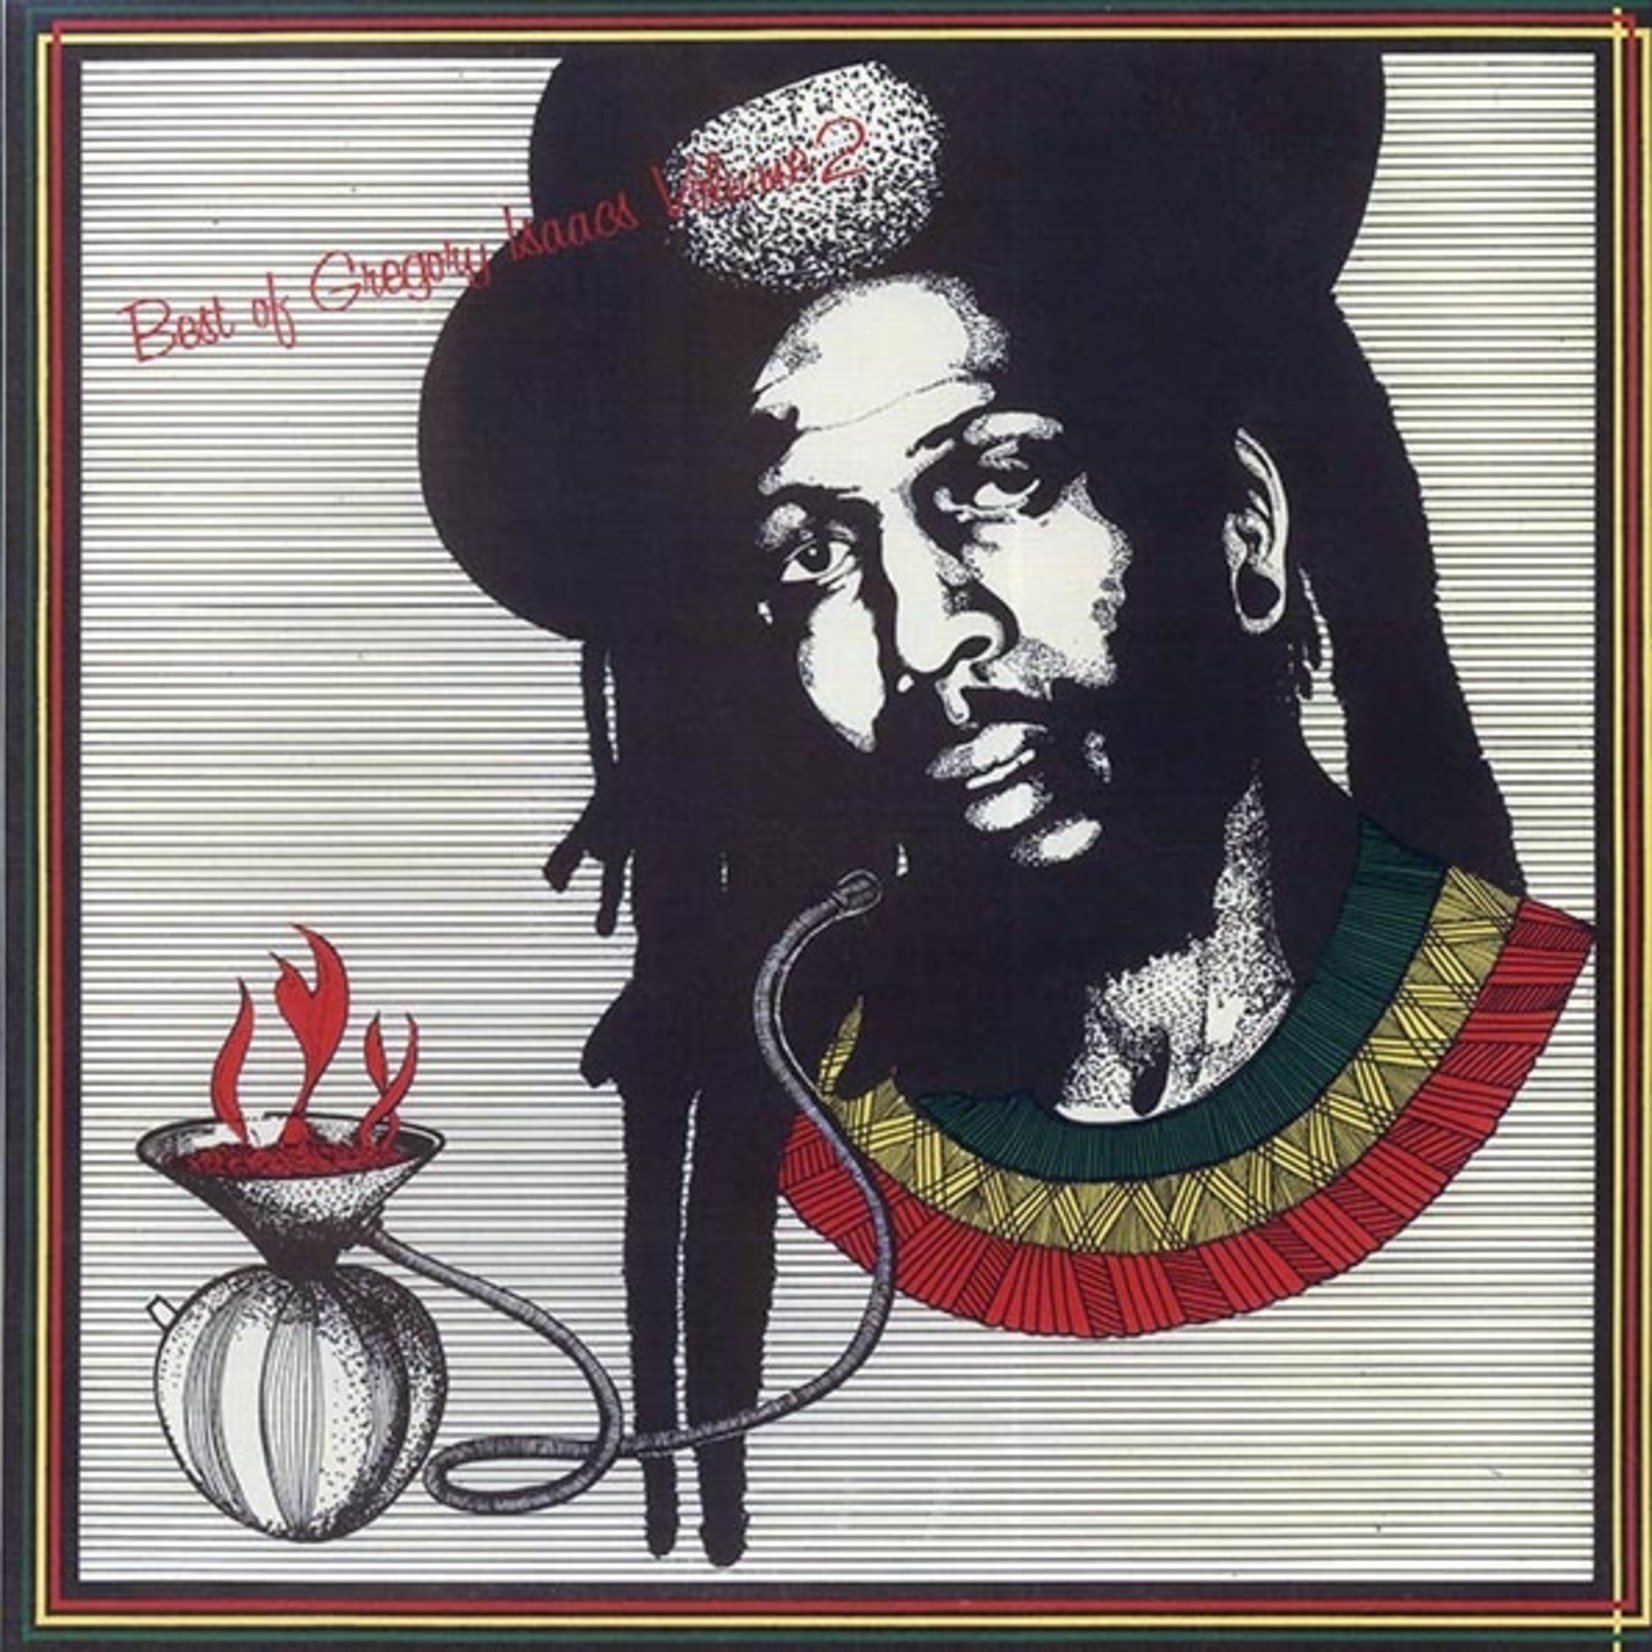 Gregory Isaacs - Best Of Gregory Isaacs Volume 2 (GG/Onlyroots)